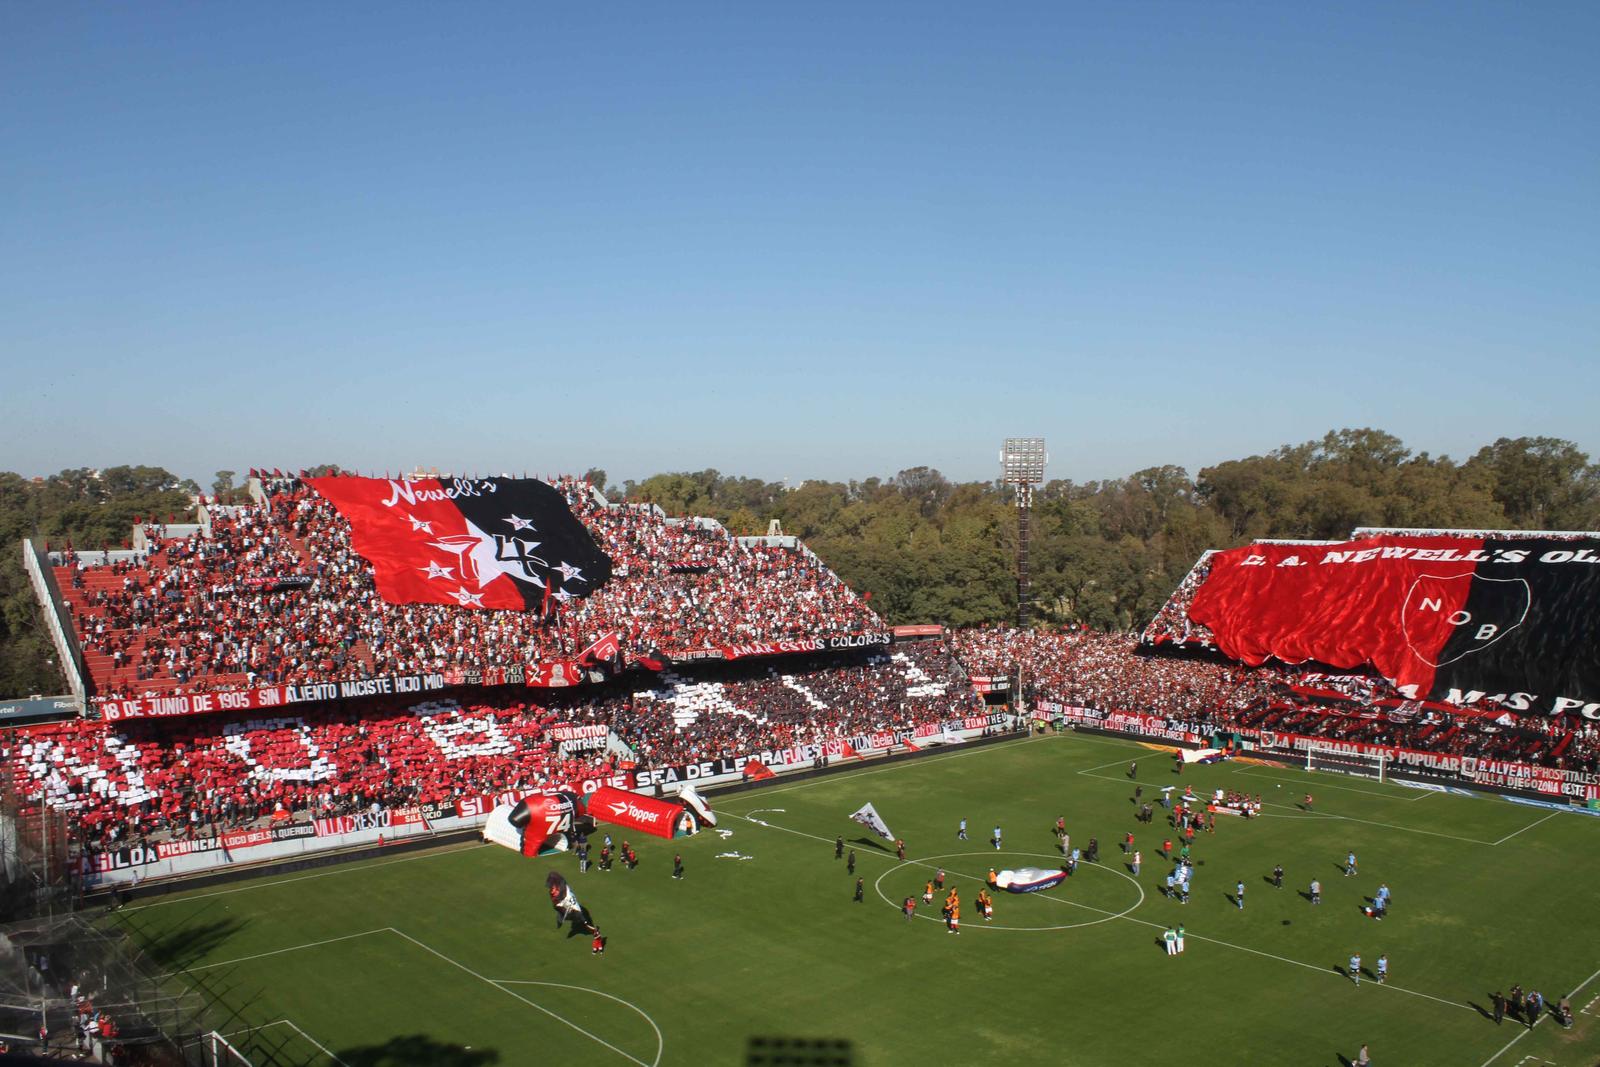 Newells Old Boys VS Talleres Cordoba ( BETTING TIPS, Match Preview & Expert Analysis )™